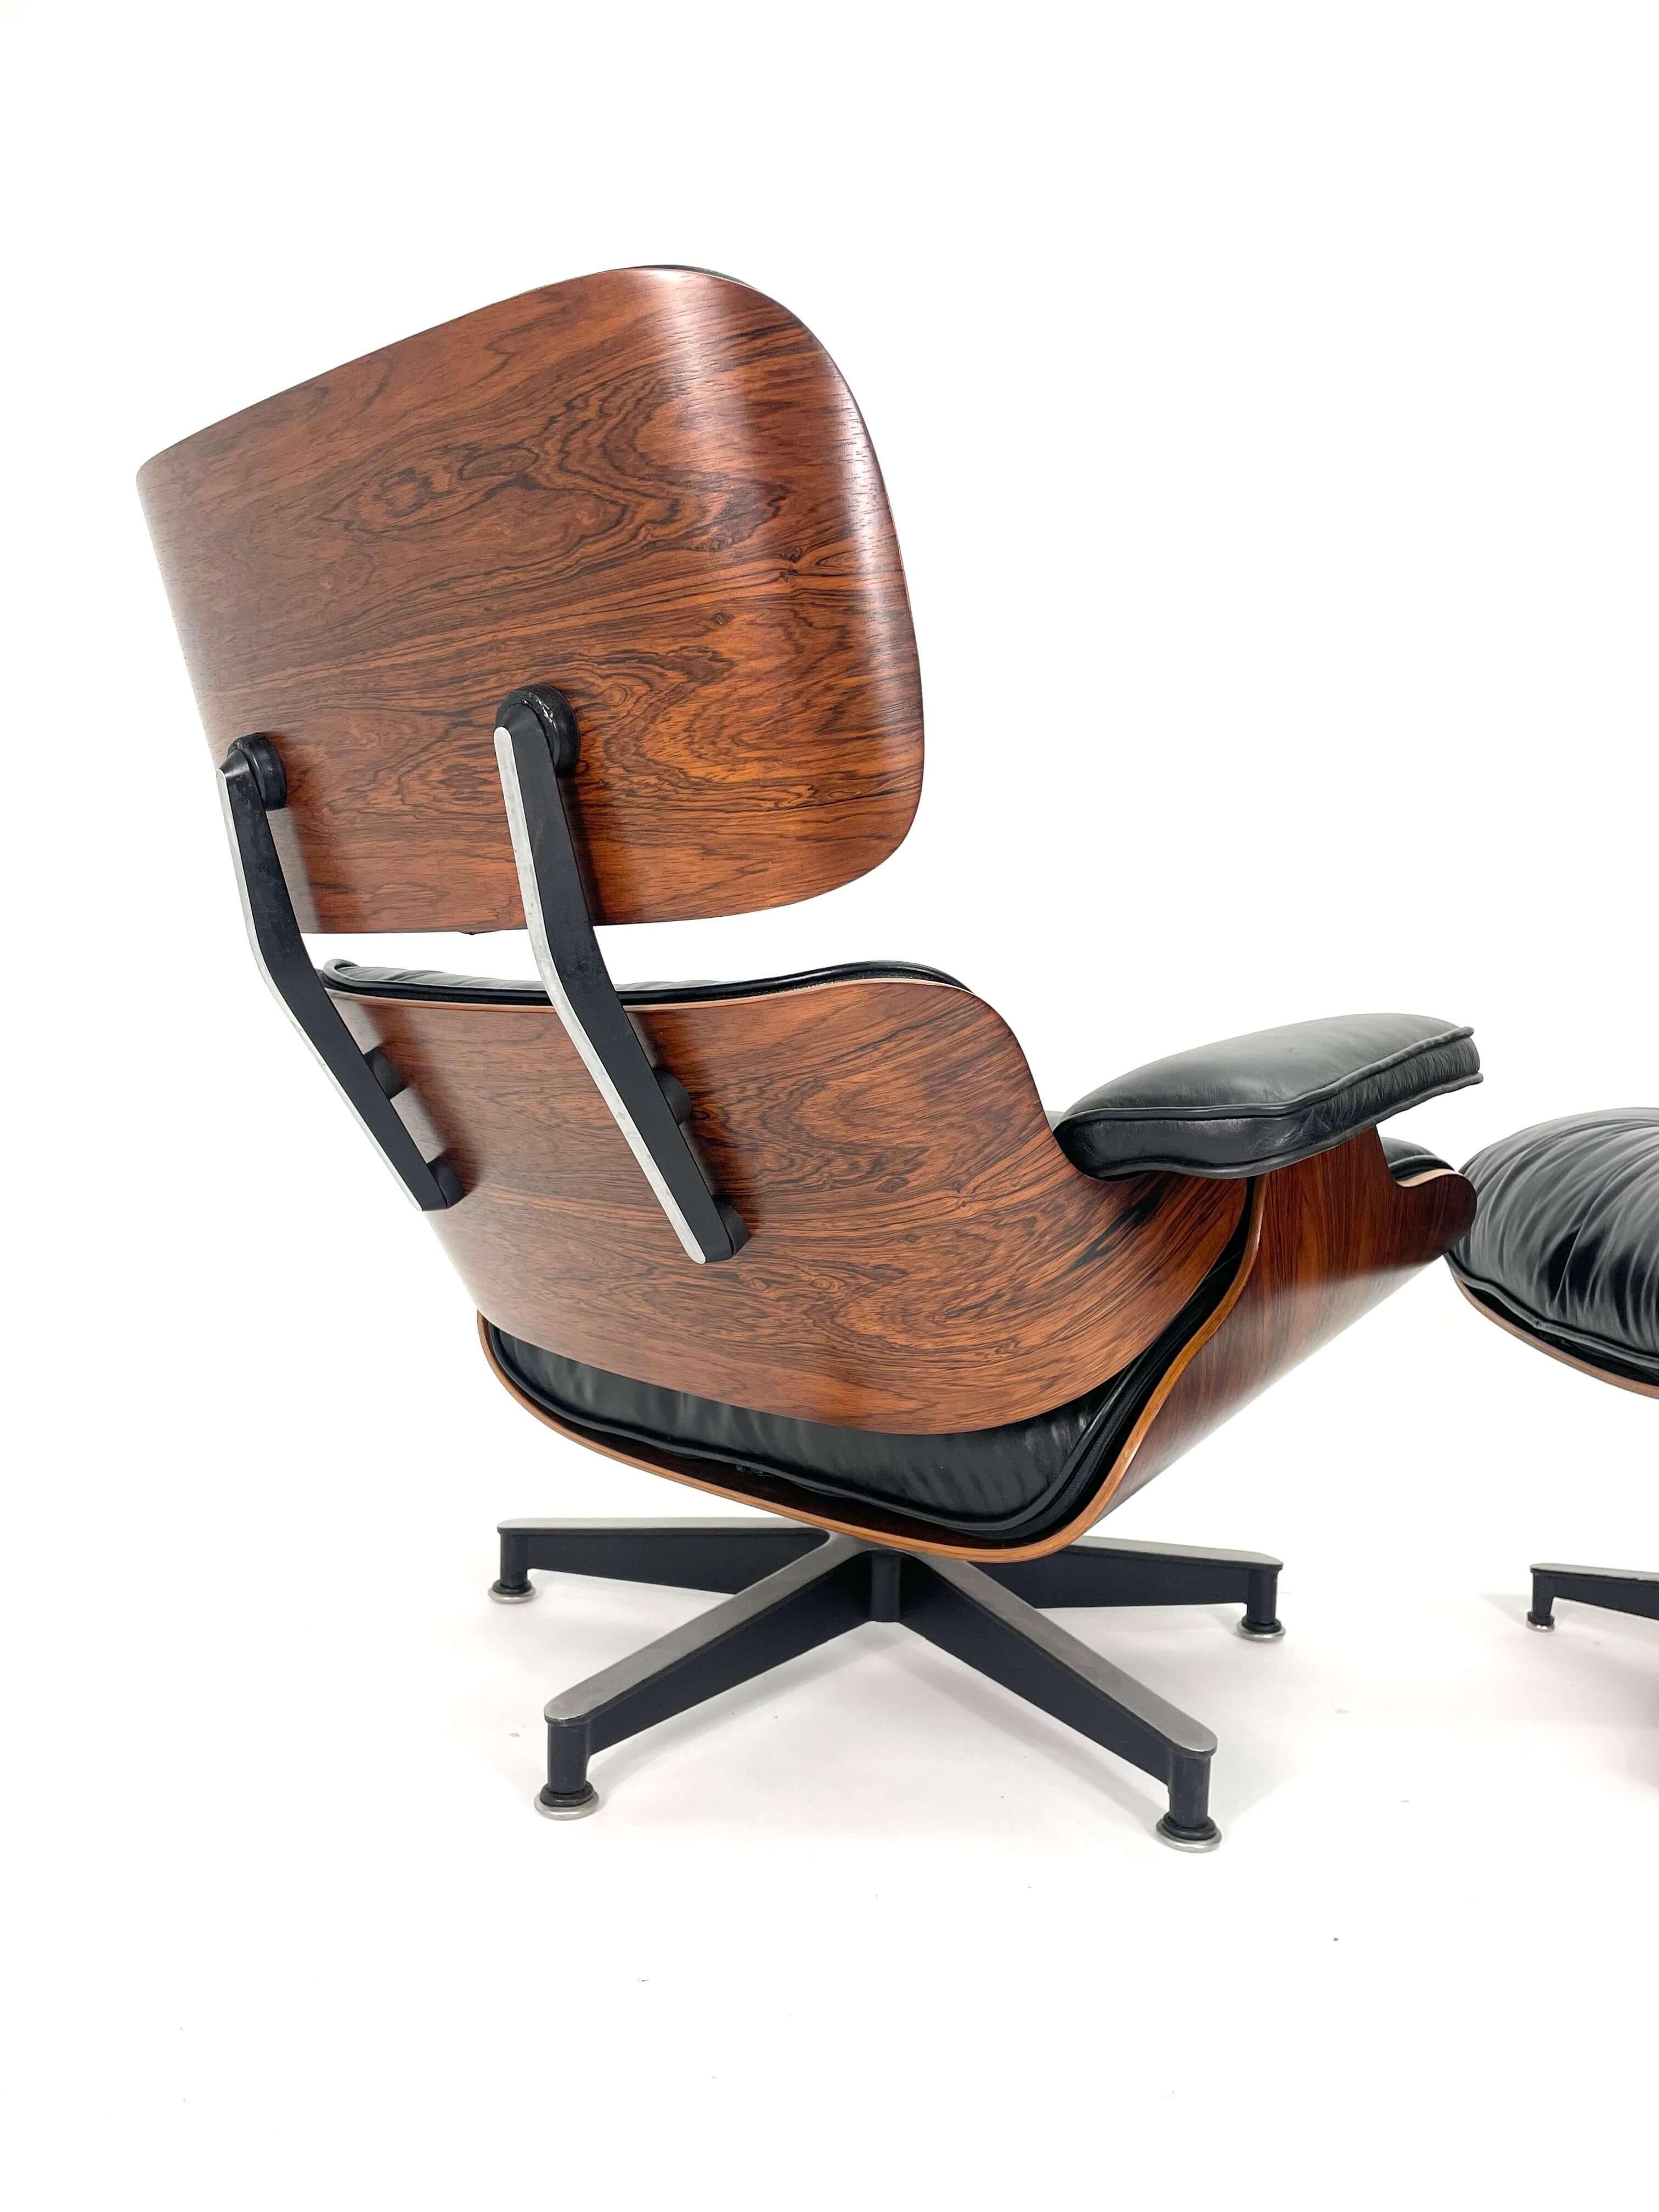 2nd Generation Eames Lounge Chair and Ottoman in Rosewood, Circa 1960's 8